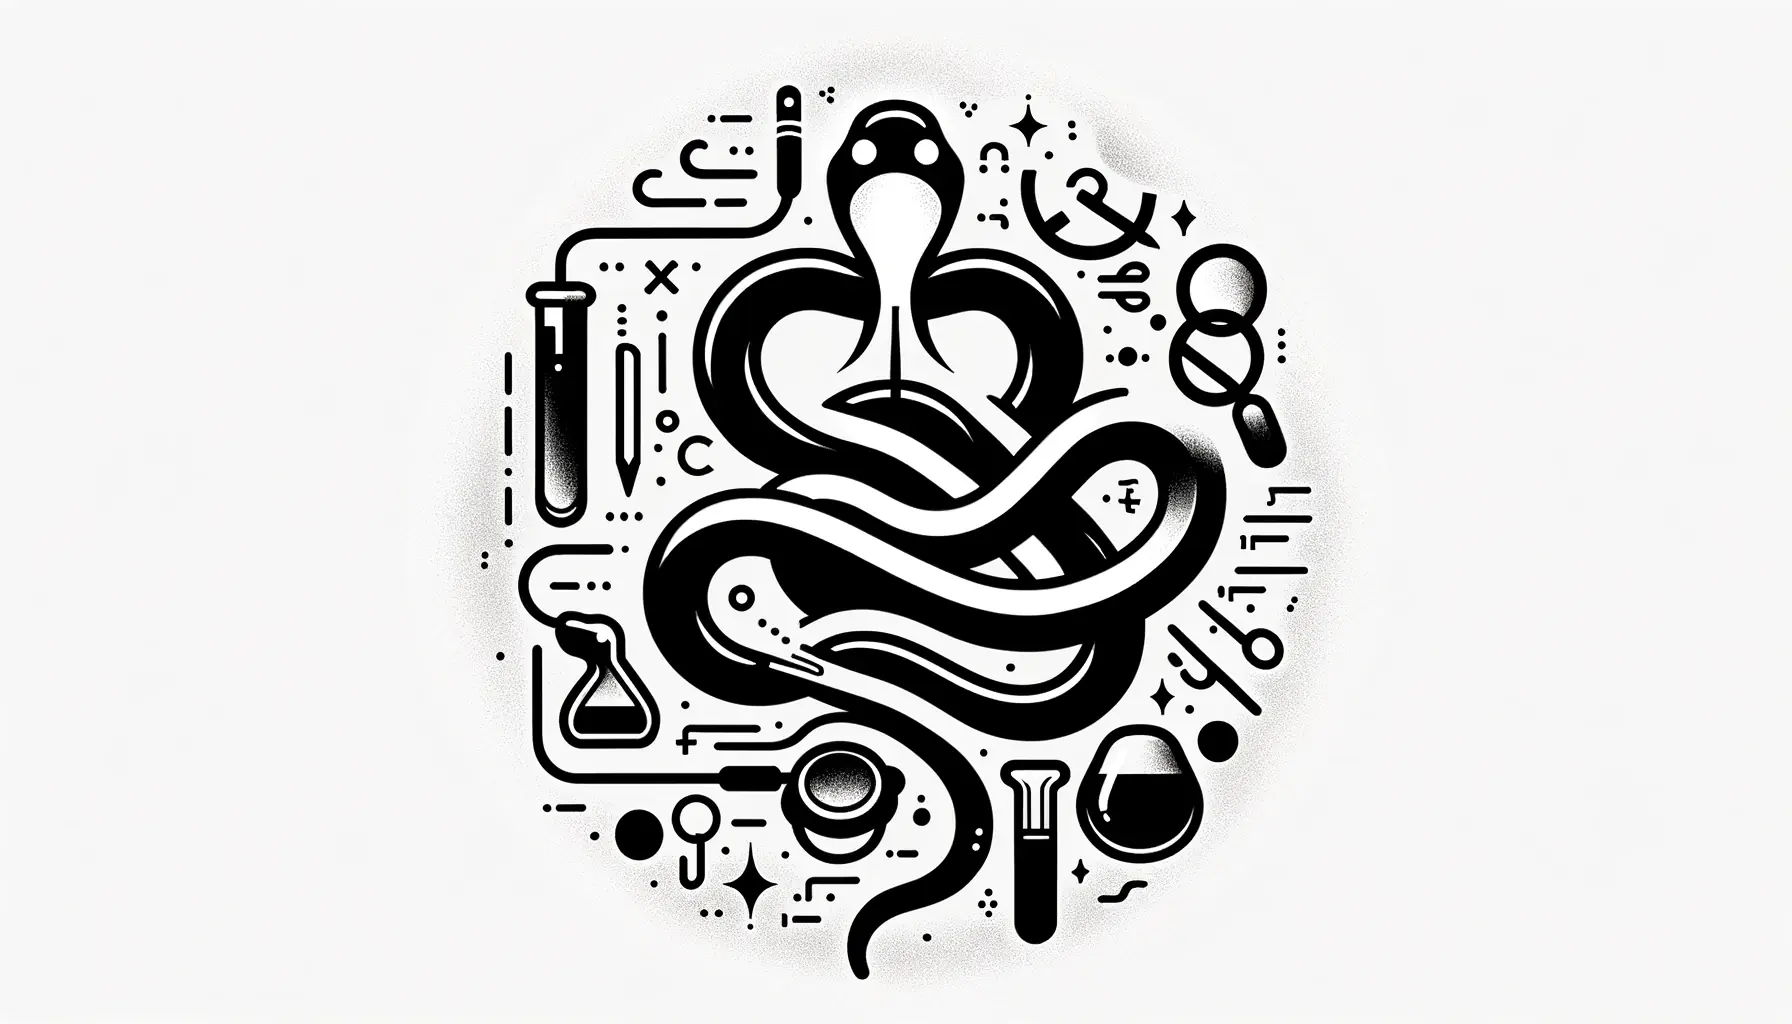 Abstract illustration of a snake